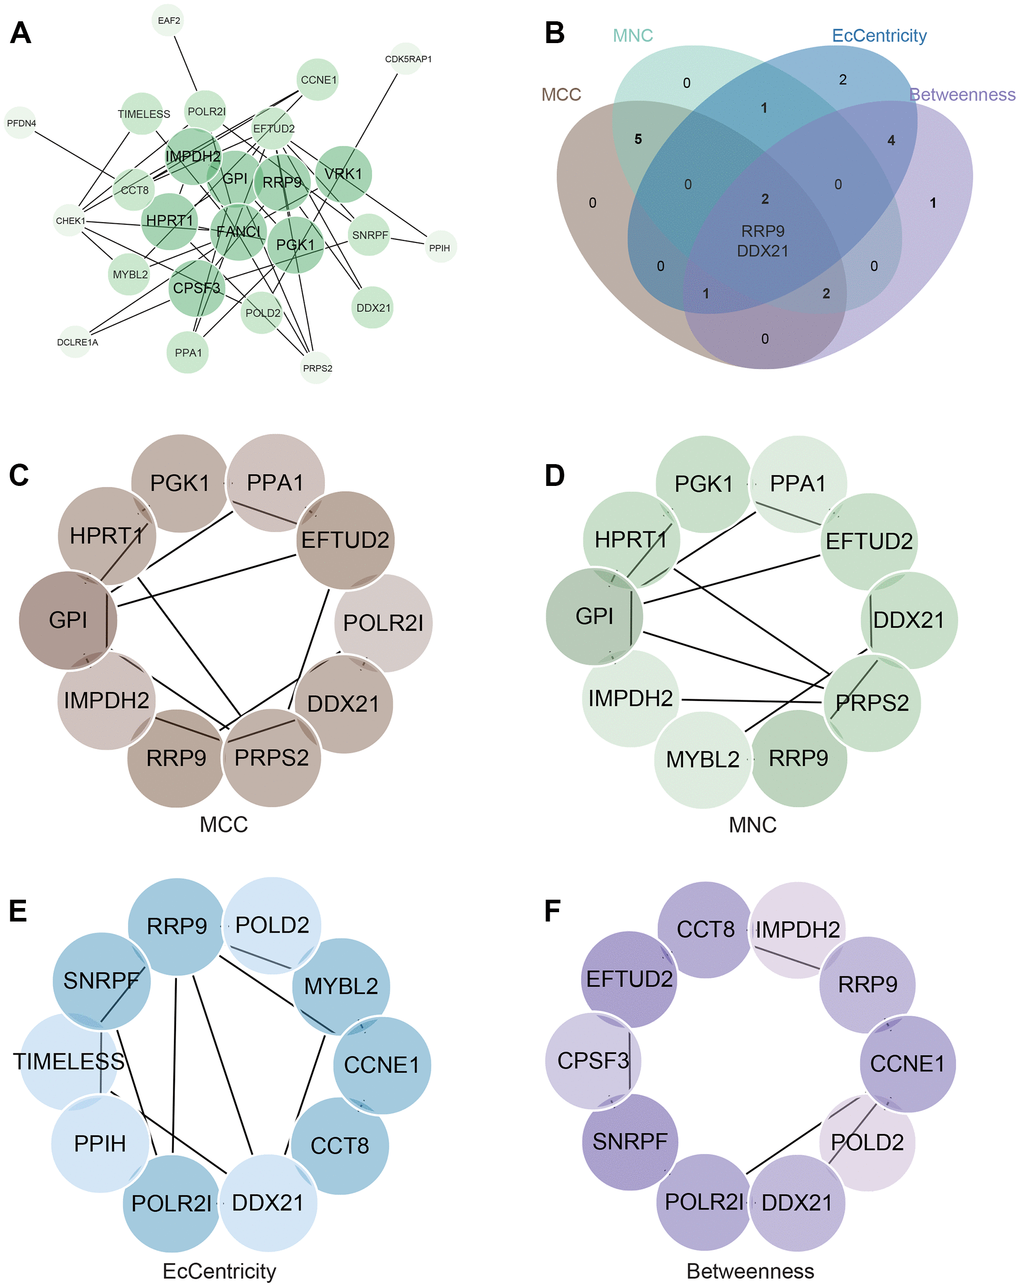 Construction and Analysis of protein-protein interaction (PPI) Network. (A) PPI network. (B) Four algorithms identify the central gene. (C–F) MCC, MNC, EcCentricity, Betweenness identify the central genes.